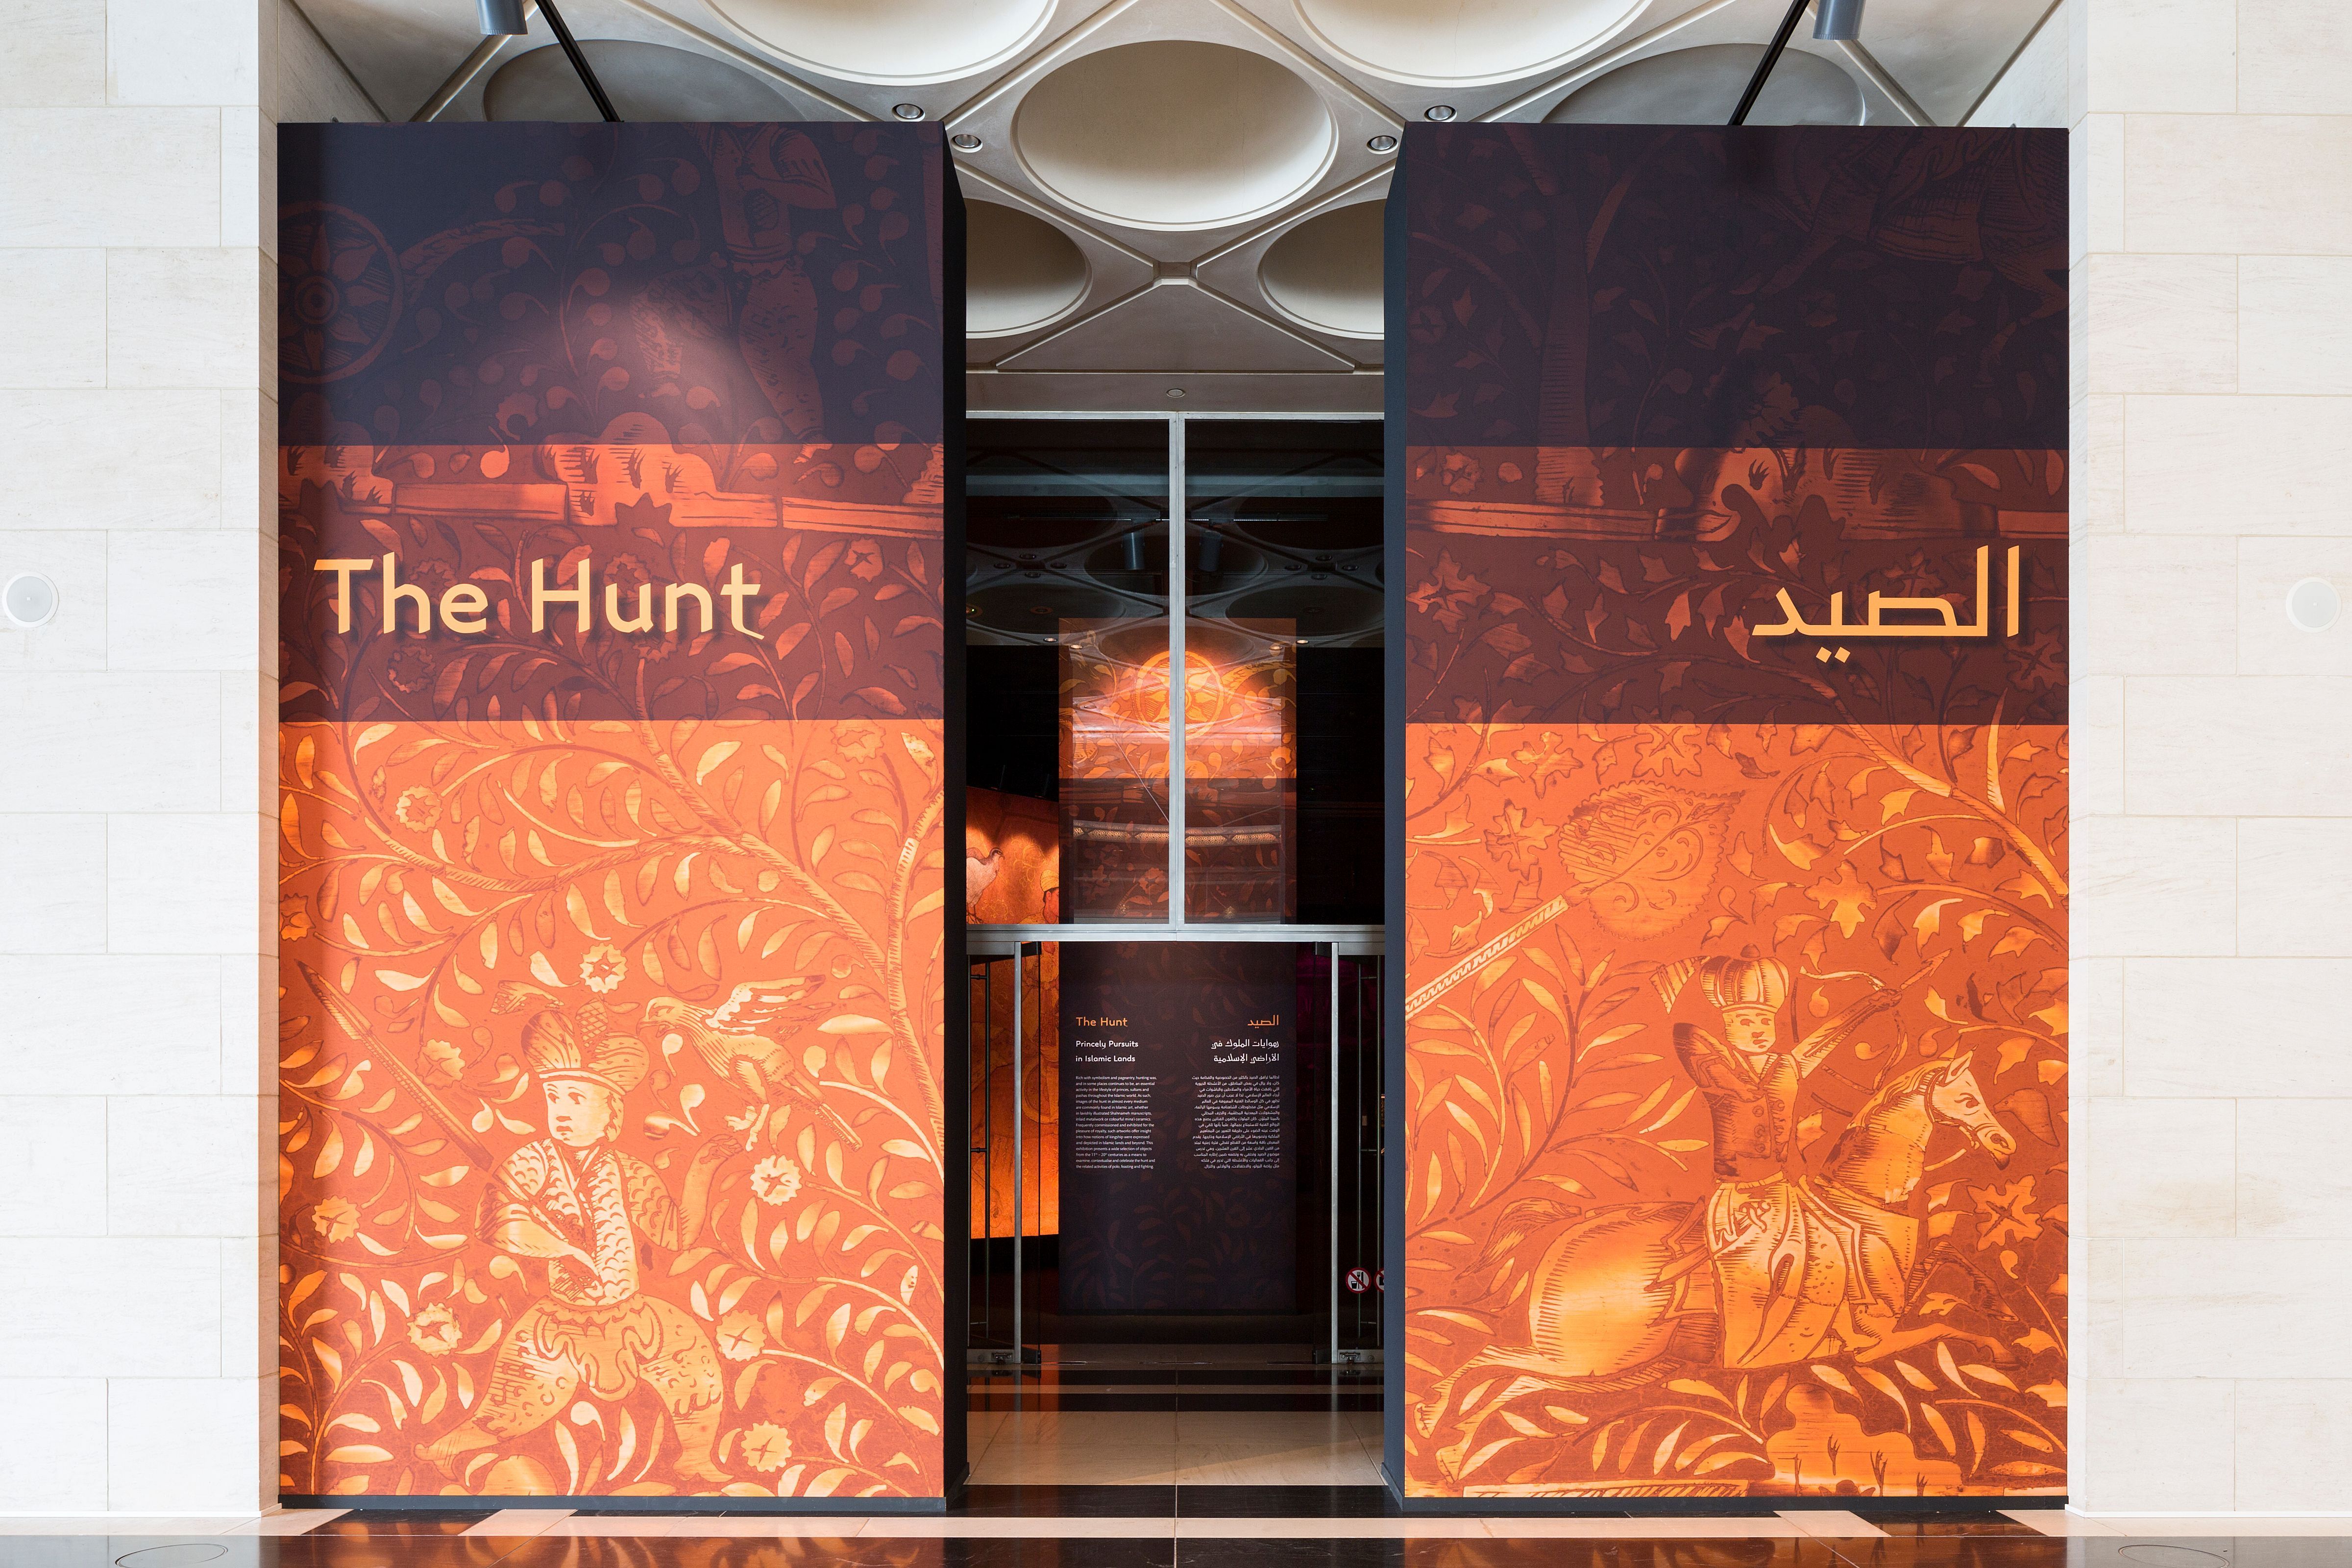 Entrance to an exhibition between 2 orange floor to ceiling panels depicting traditional Turkish illustrations and text.